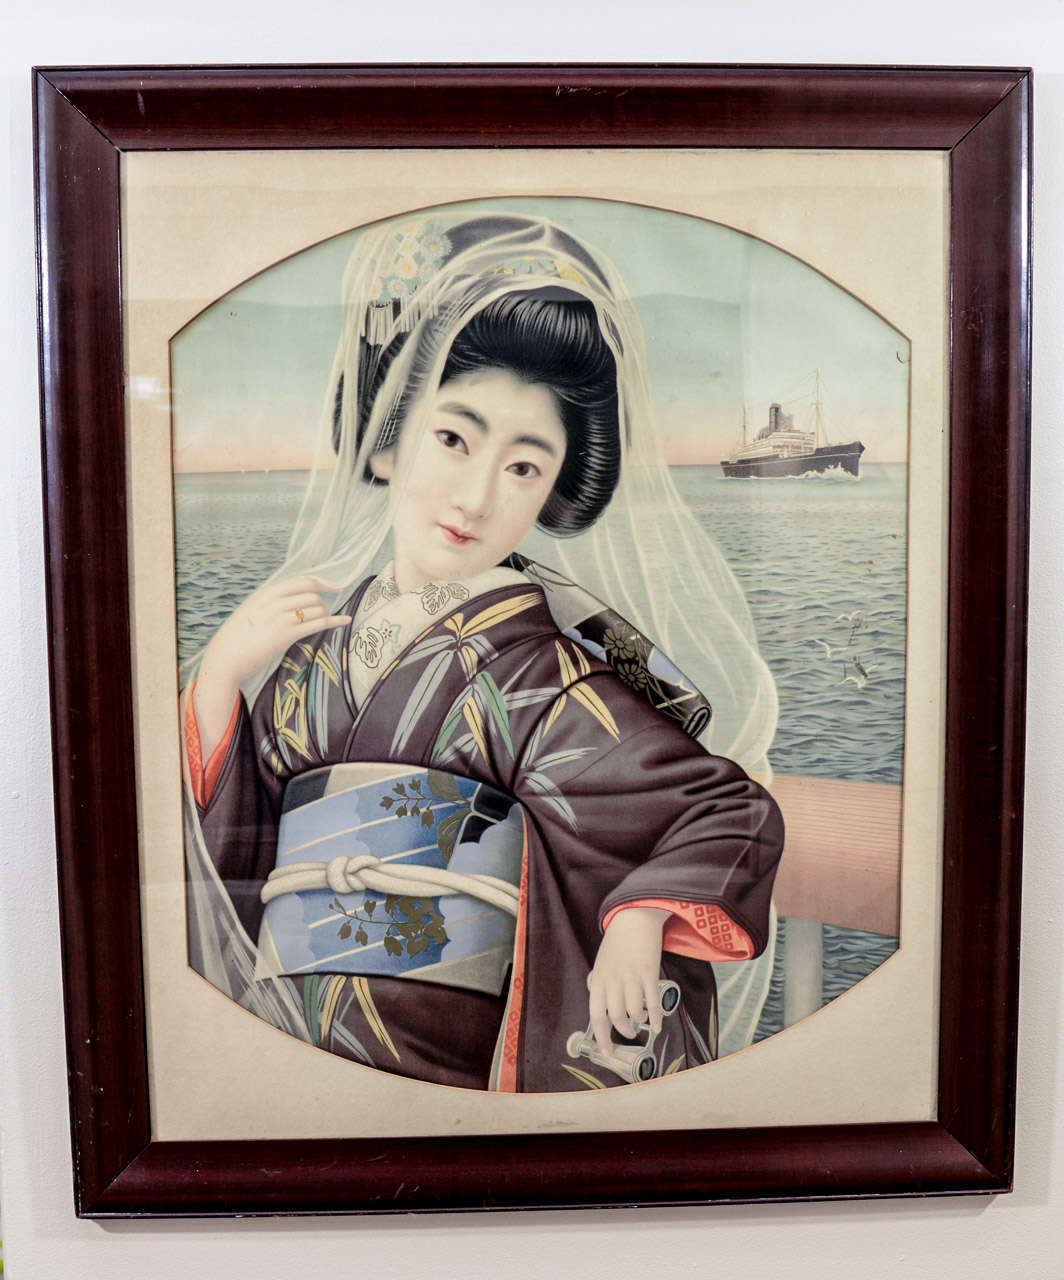 A Japanese late Meiji period portrait of a young lady standing near the ocean.